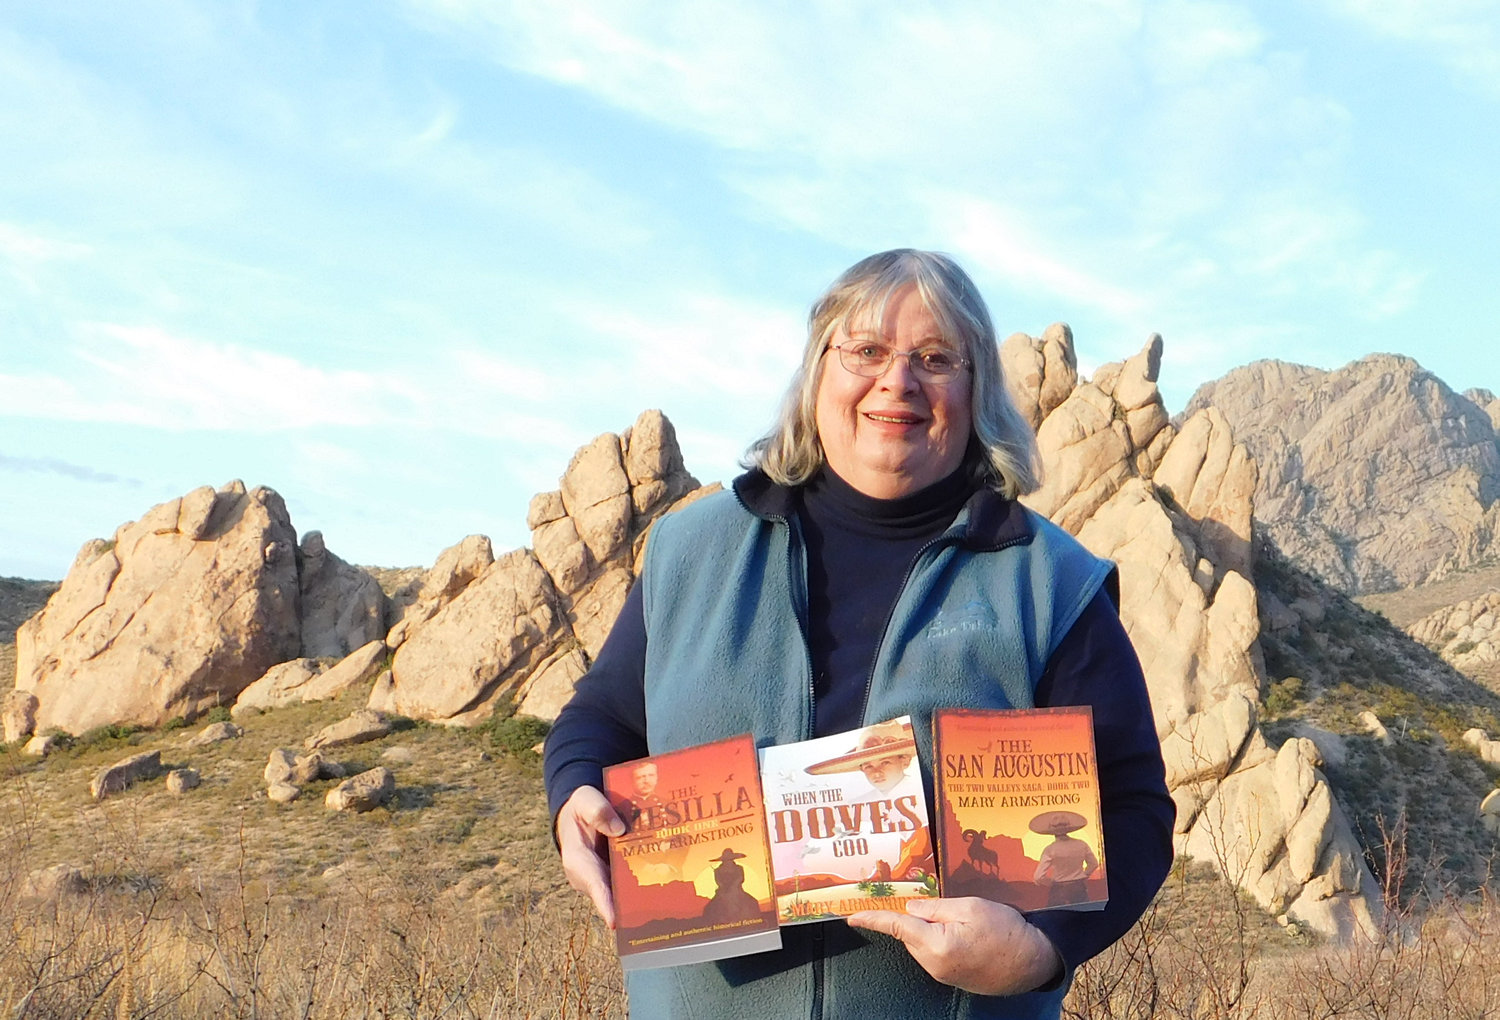 Las Cruces author Mary Armstrong shows some of her books. Her latest, “The San Augustin: The Two Valleys Saga, Book Two,” is now available.